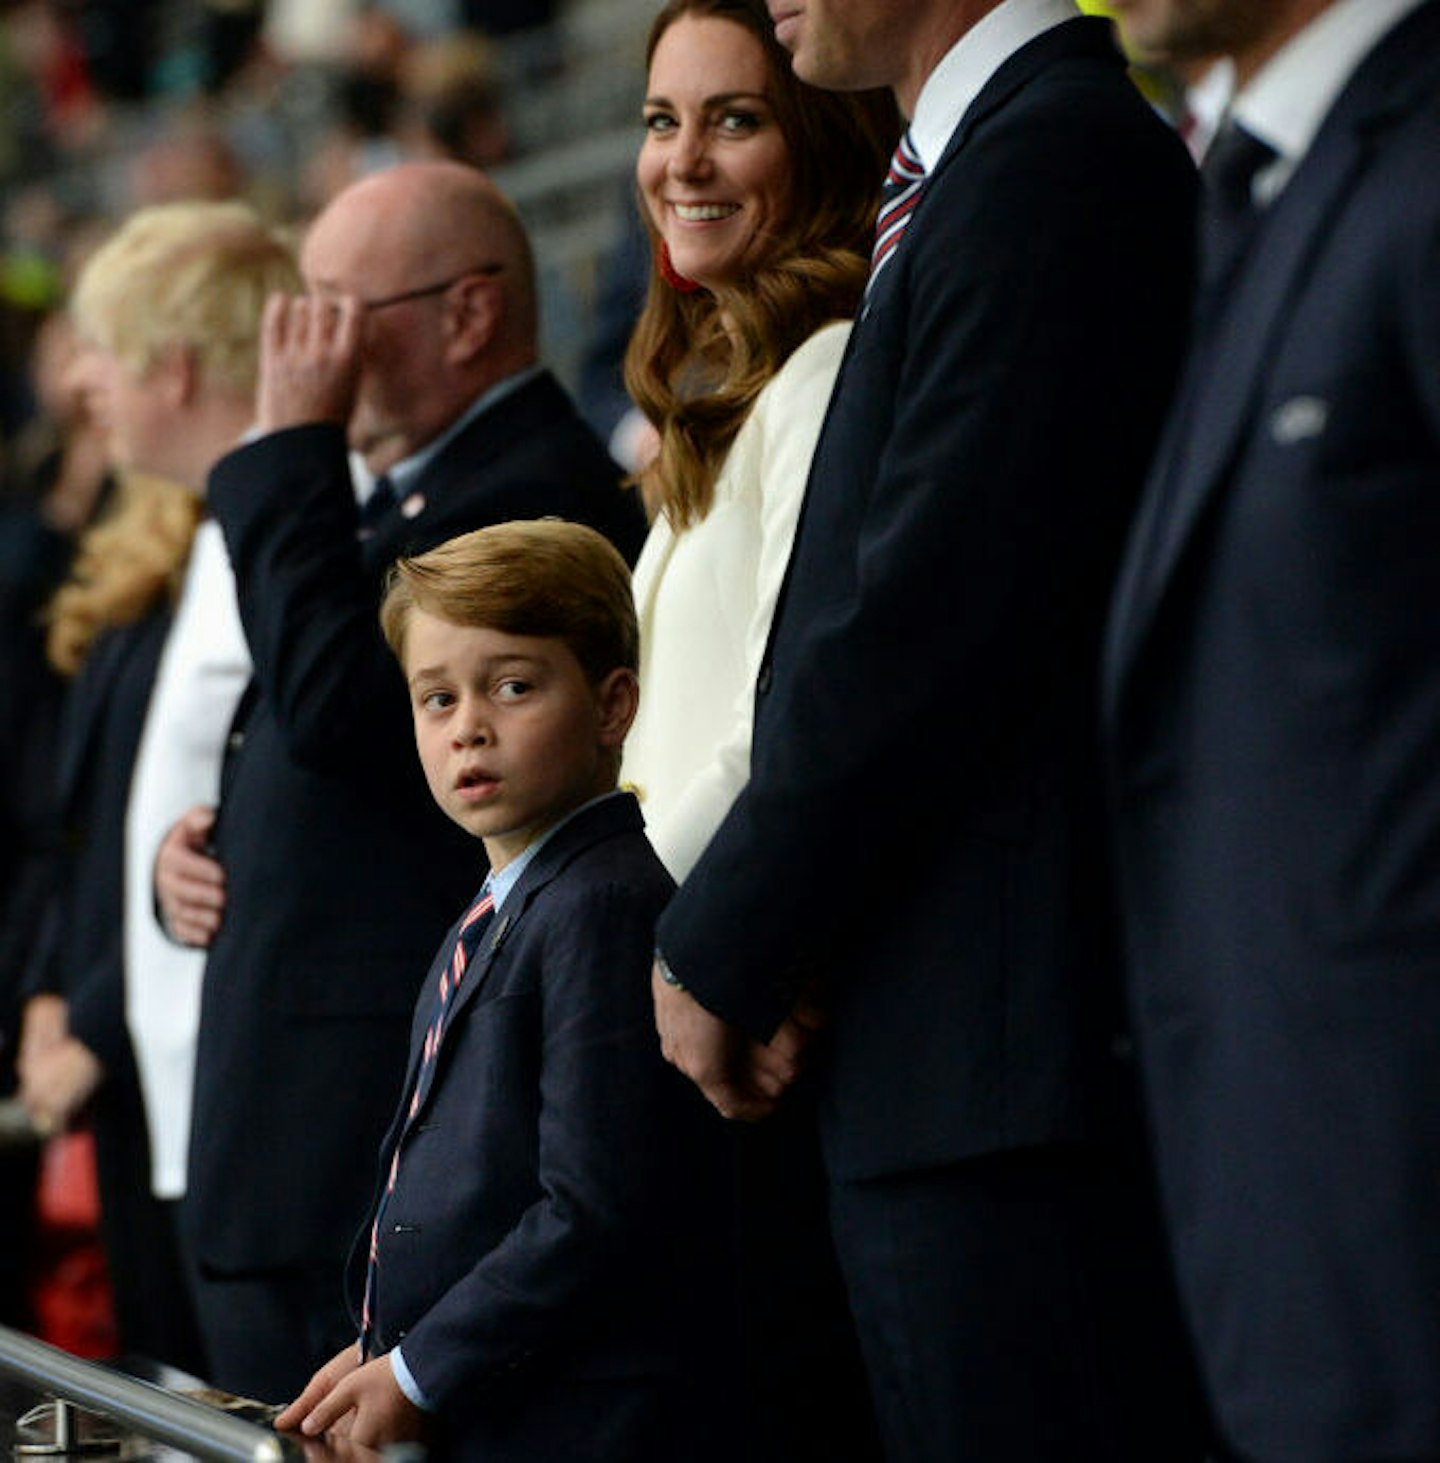 Prince George at the Italy V England Euros Final